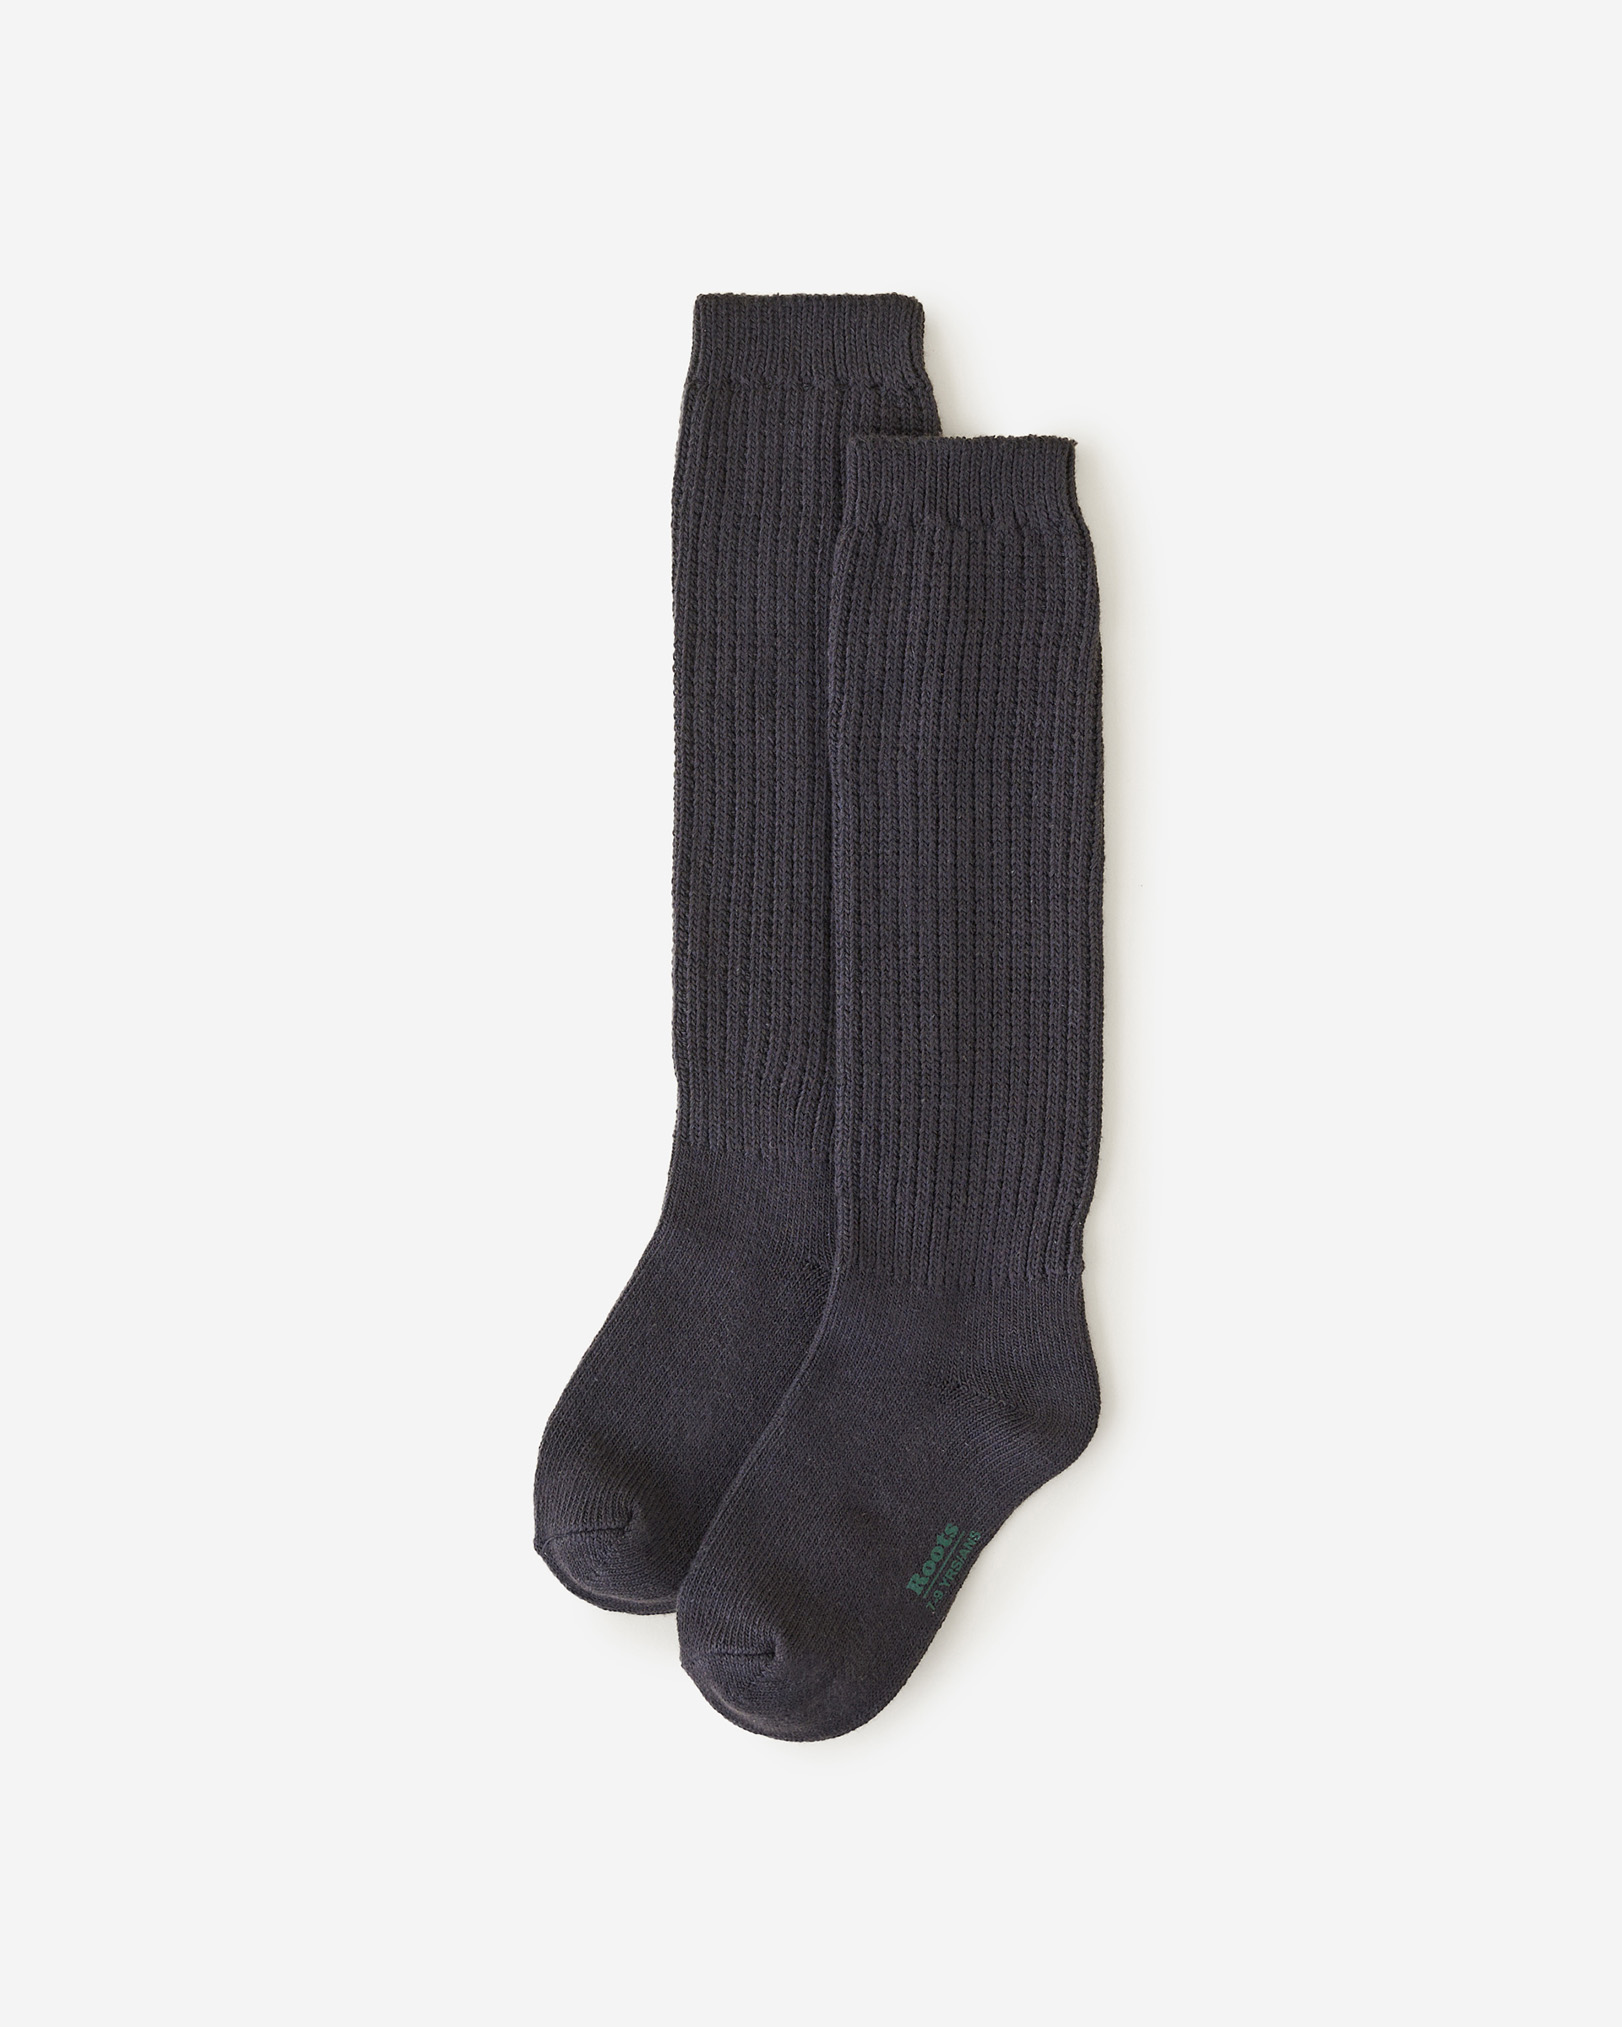 Roots Kid Warm-Up Sock in Charcoal Black